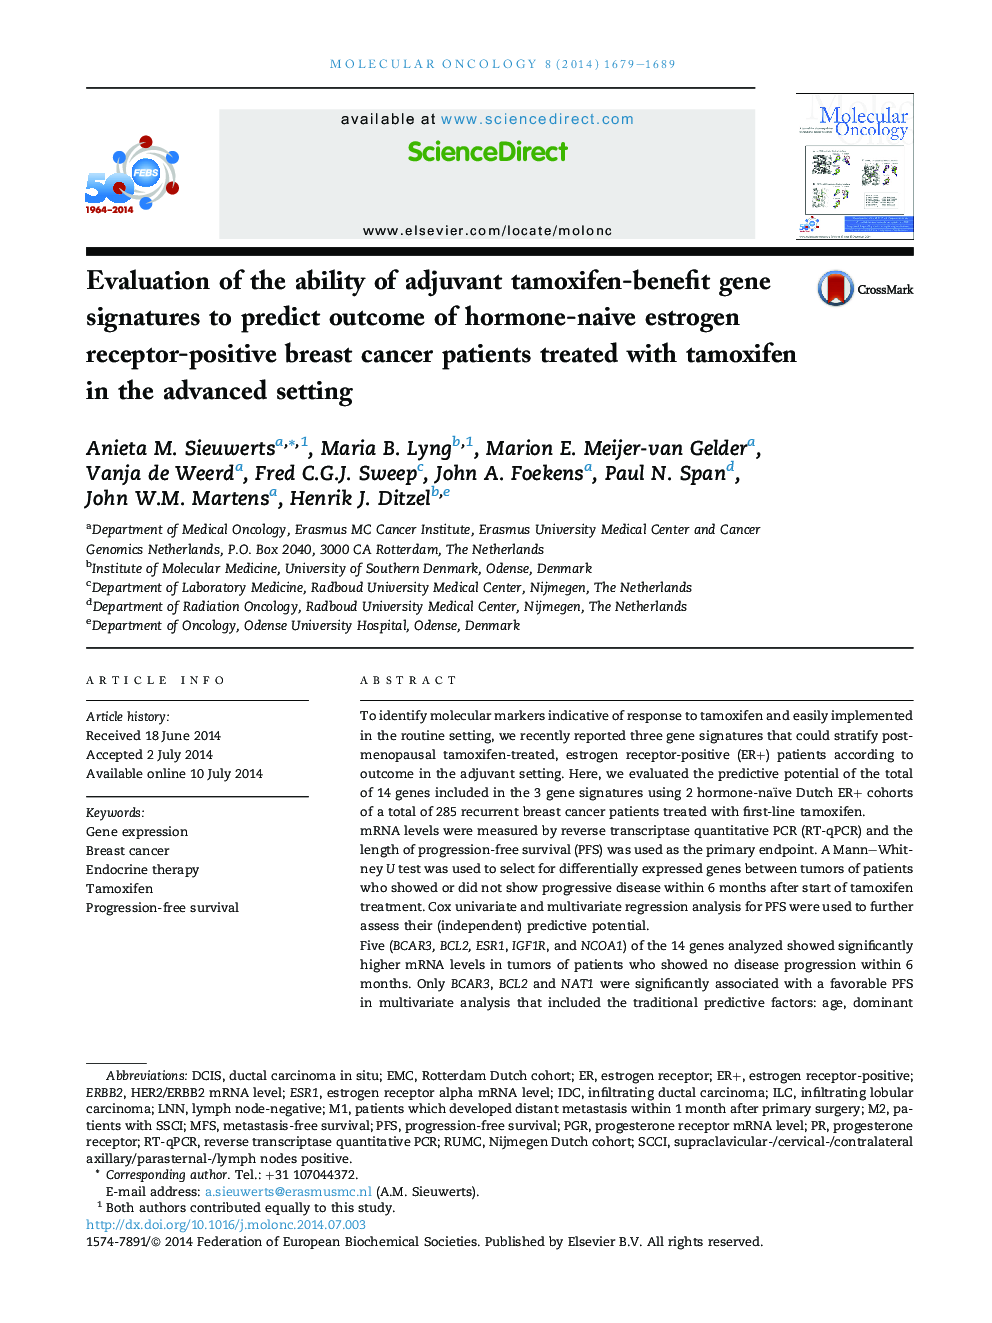 Evaluation of the ability of adjuvant tamoxifen-benefit gene signatures to predict outcome of hormone-naive estrogen receptor-positive breast cancer patients treated with tamoxifen in the advanced setting